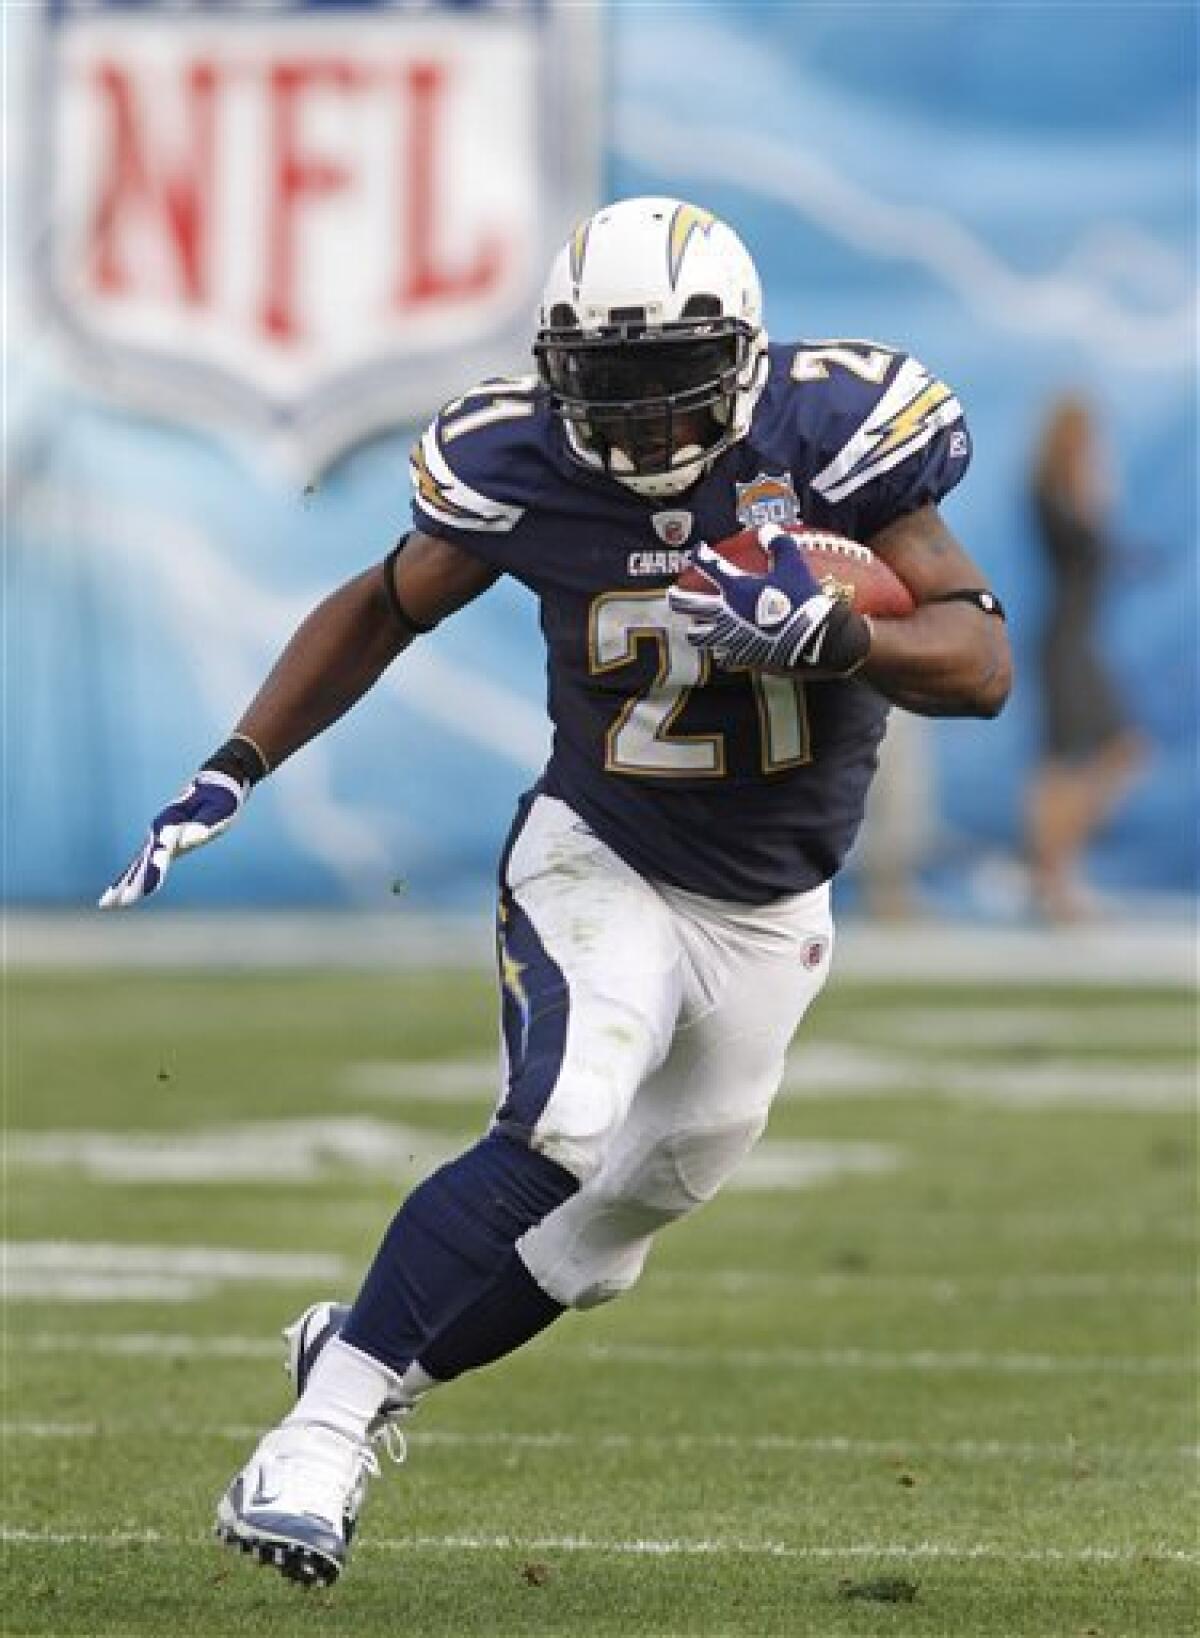 tomlinson san diego chargers